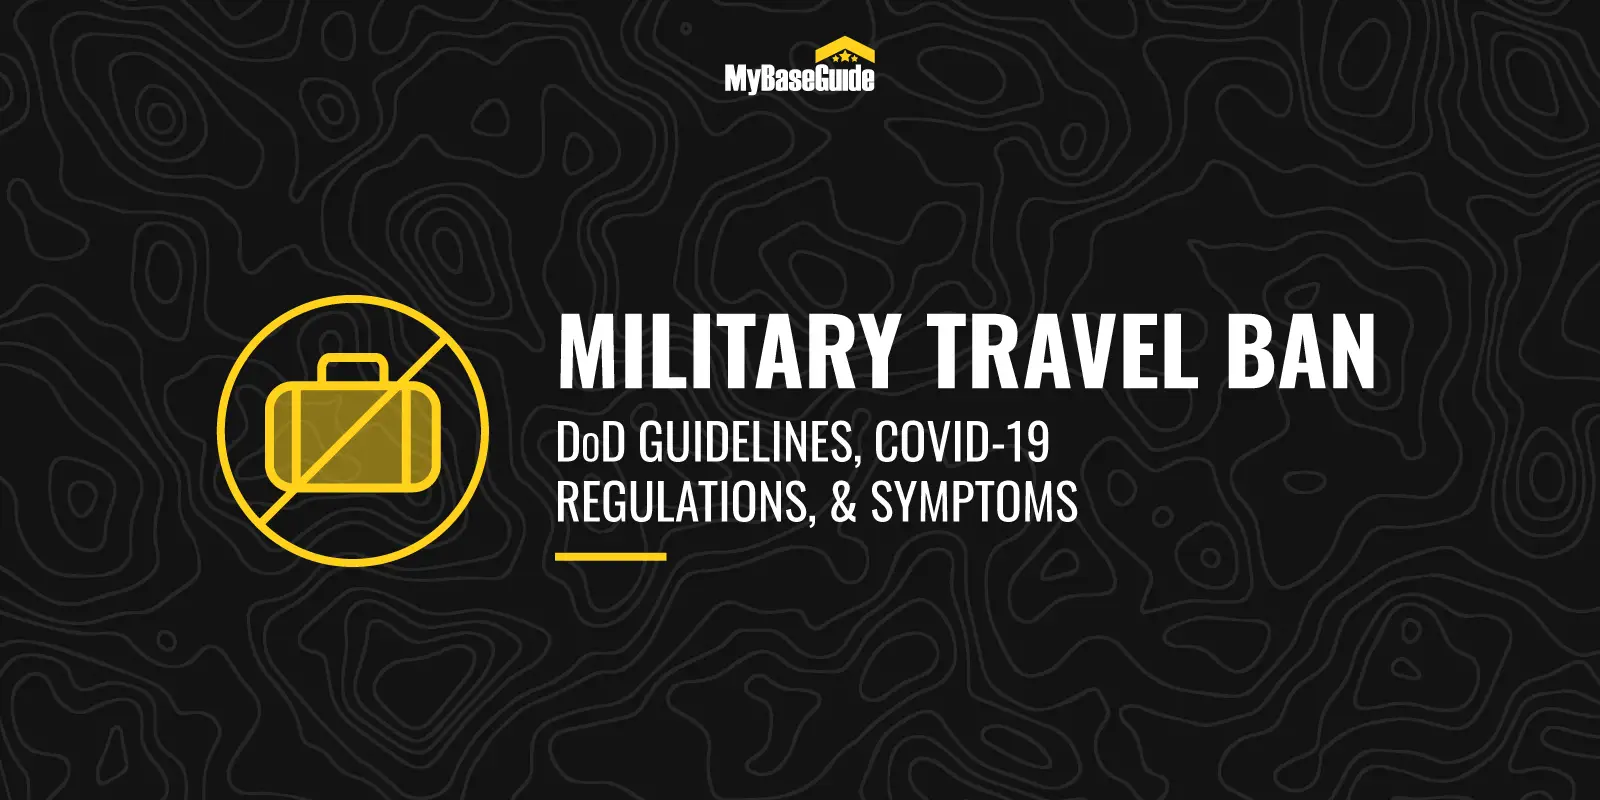 dod travel restrictions countries